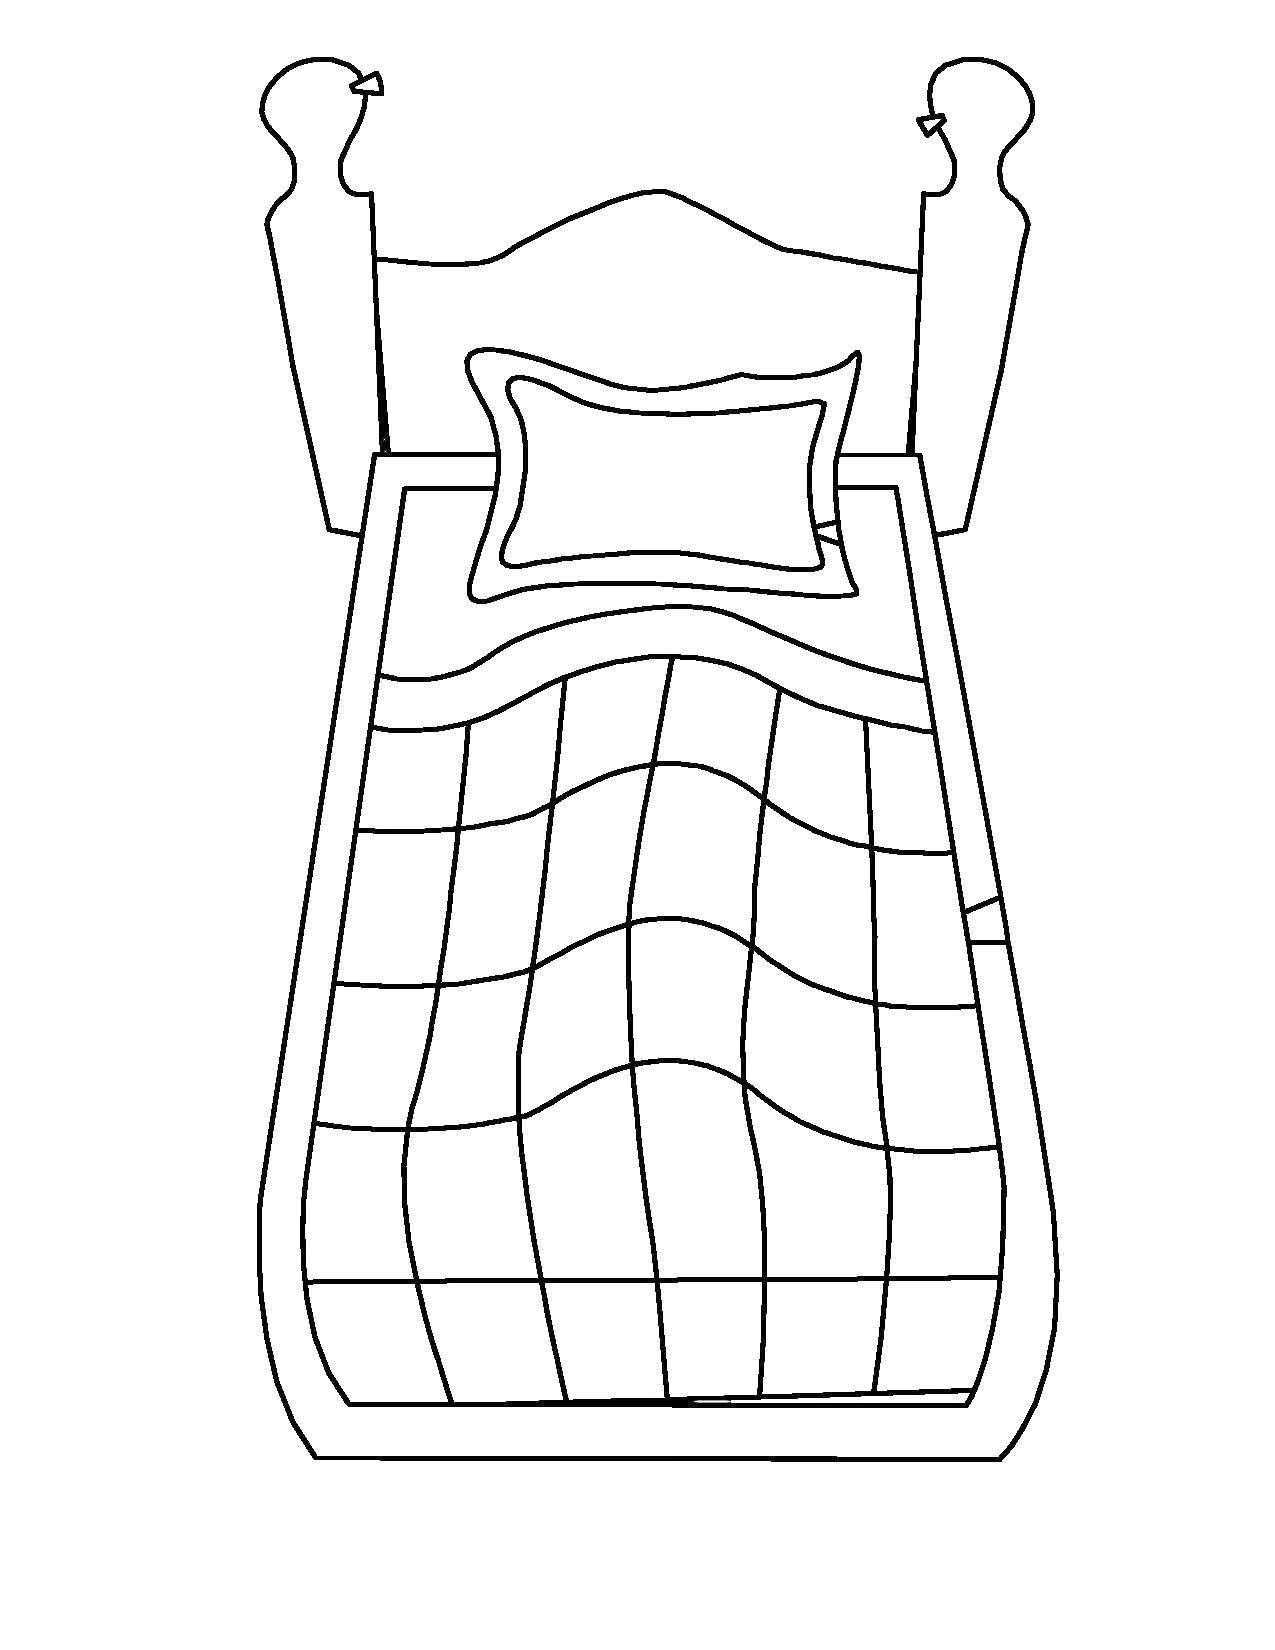 Coloring Cot. Category furniture. Tags:  Furniture.